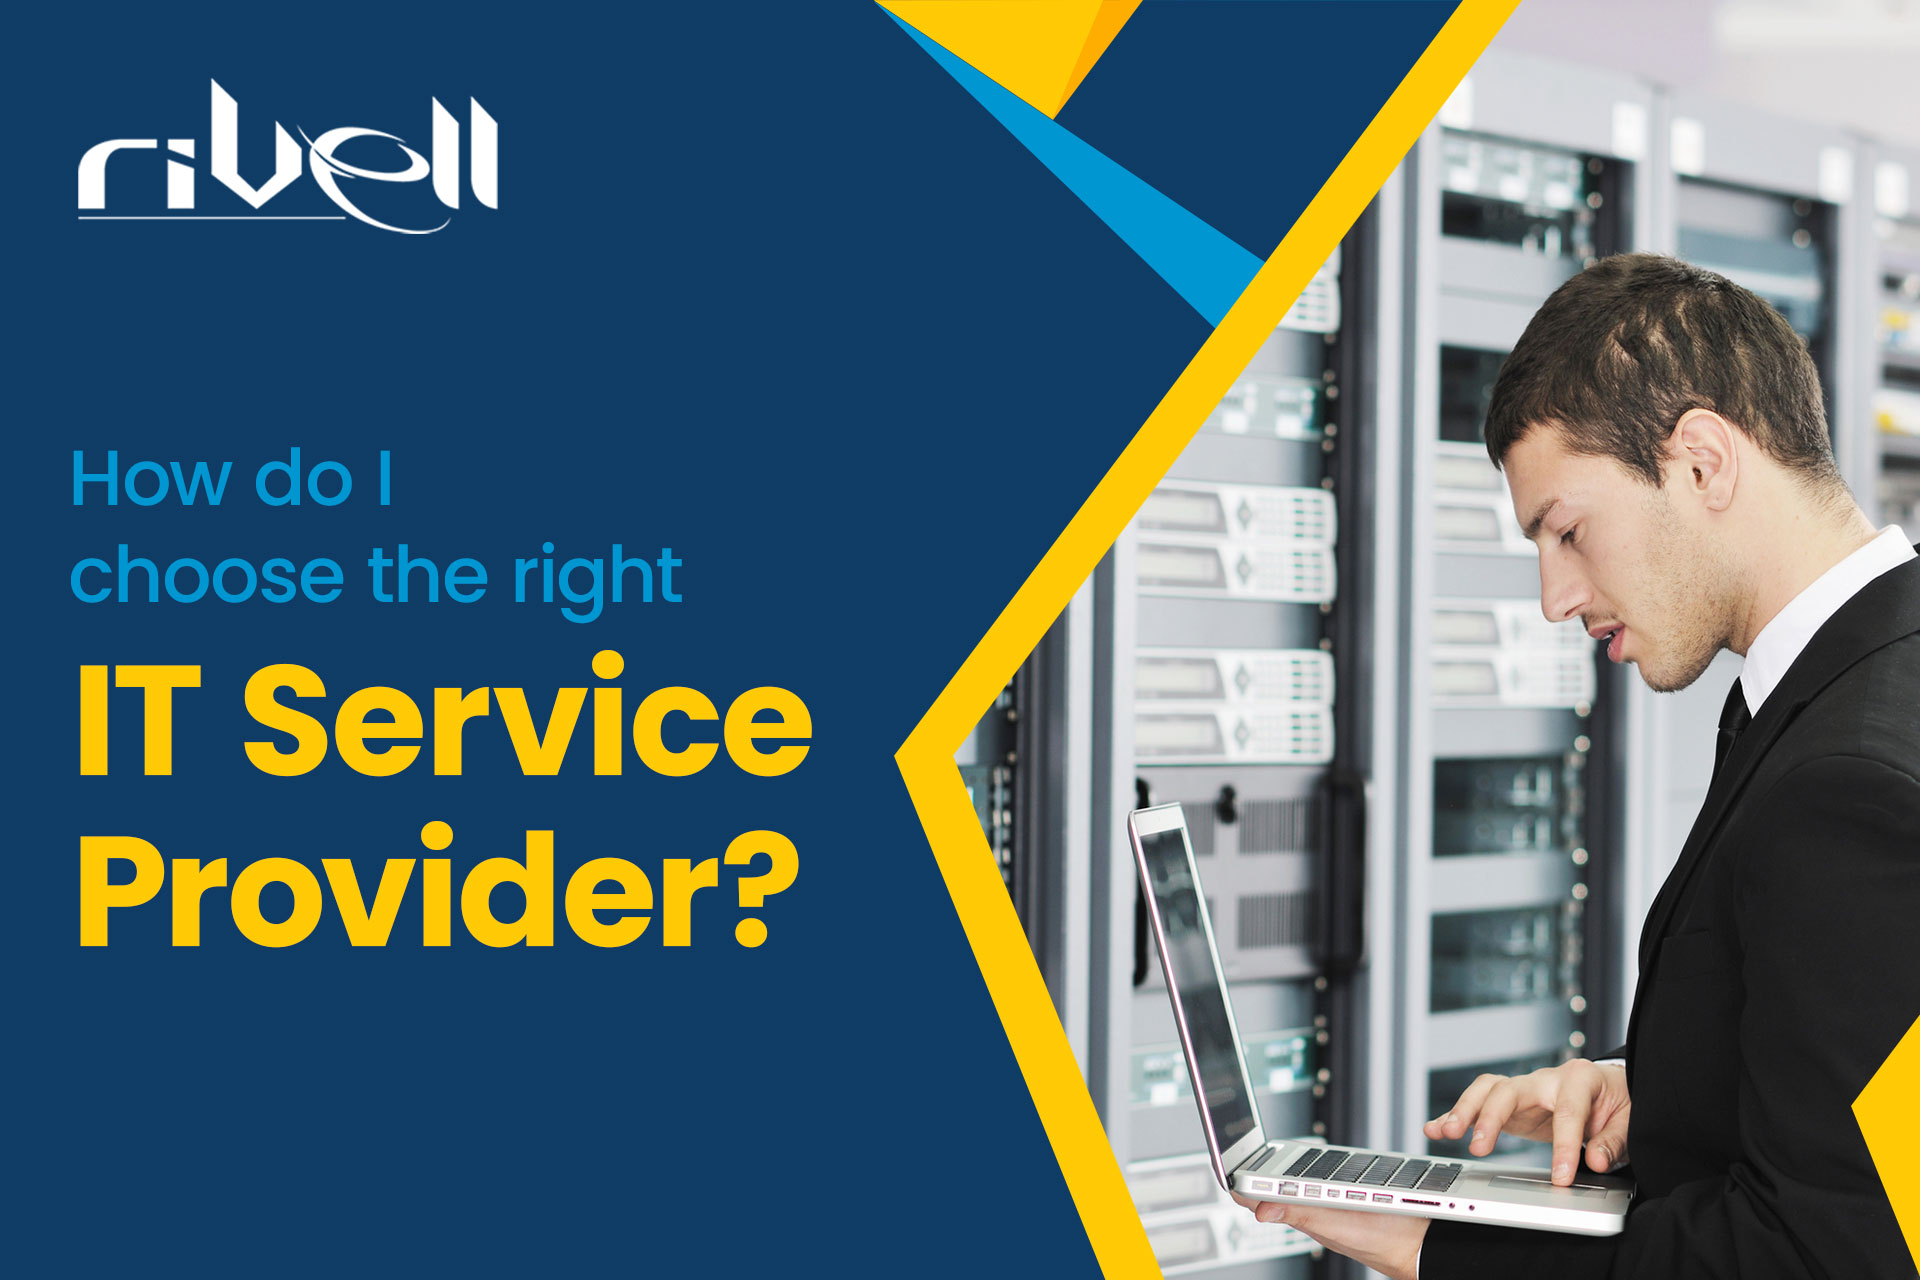 How do I choose the right IT service provider